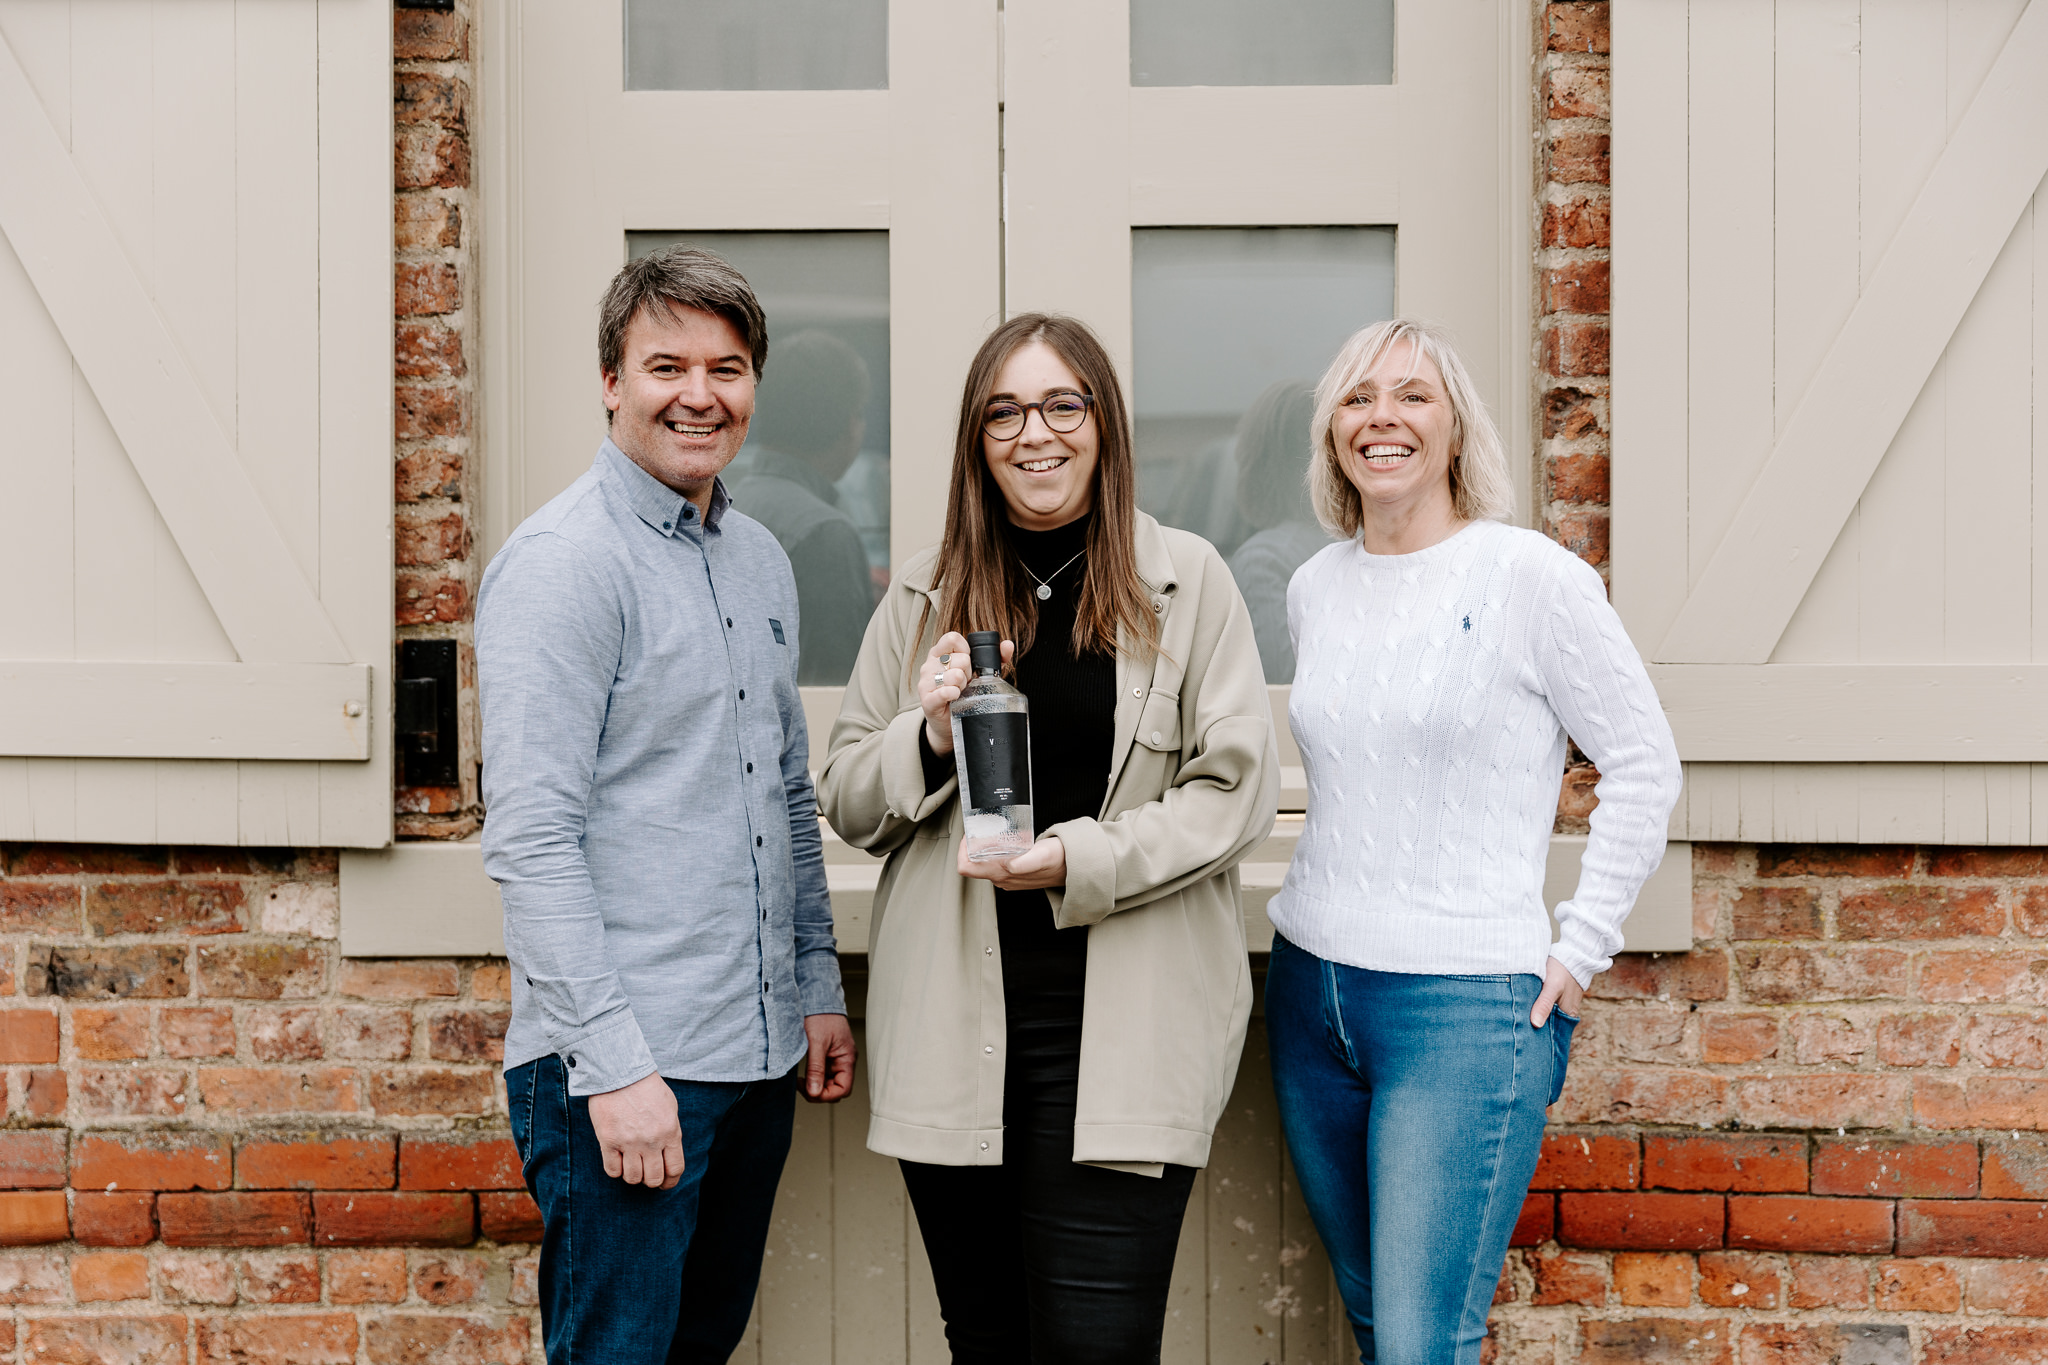 Teesside creative agency shortlisted in national awards.